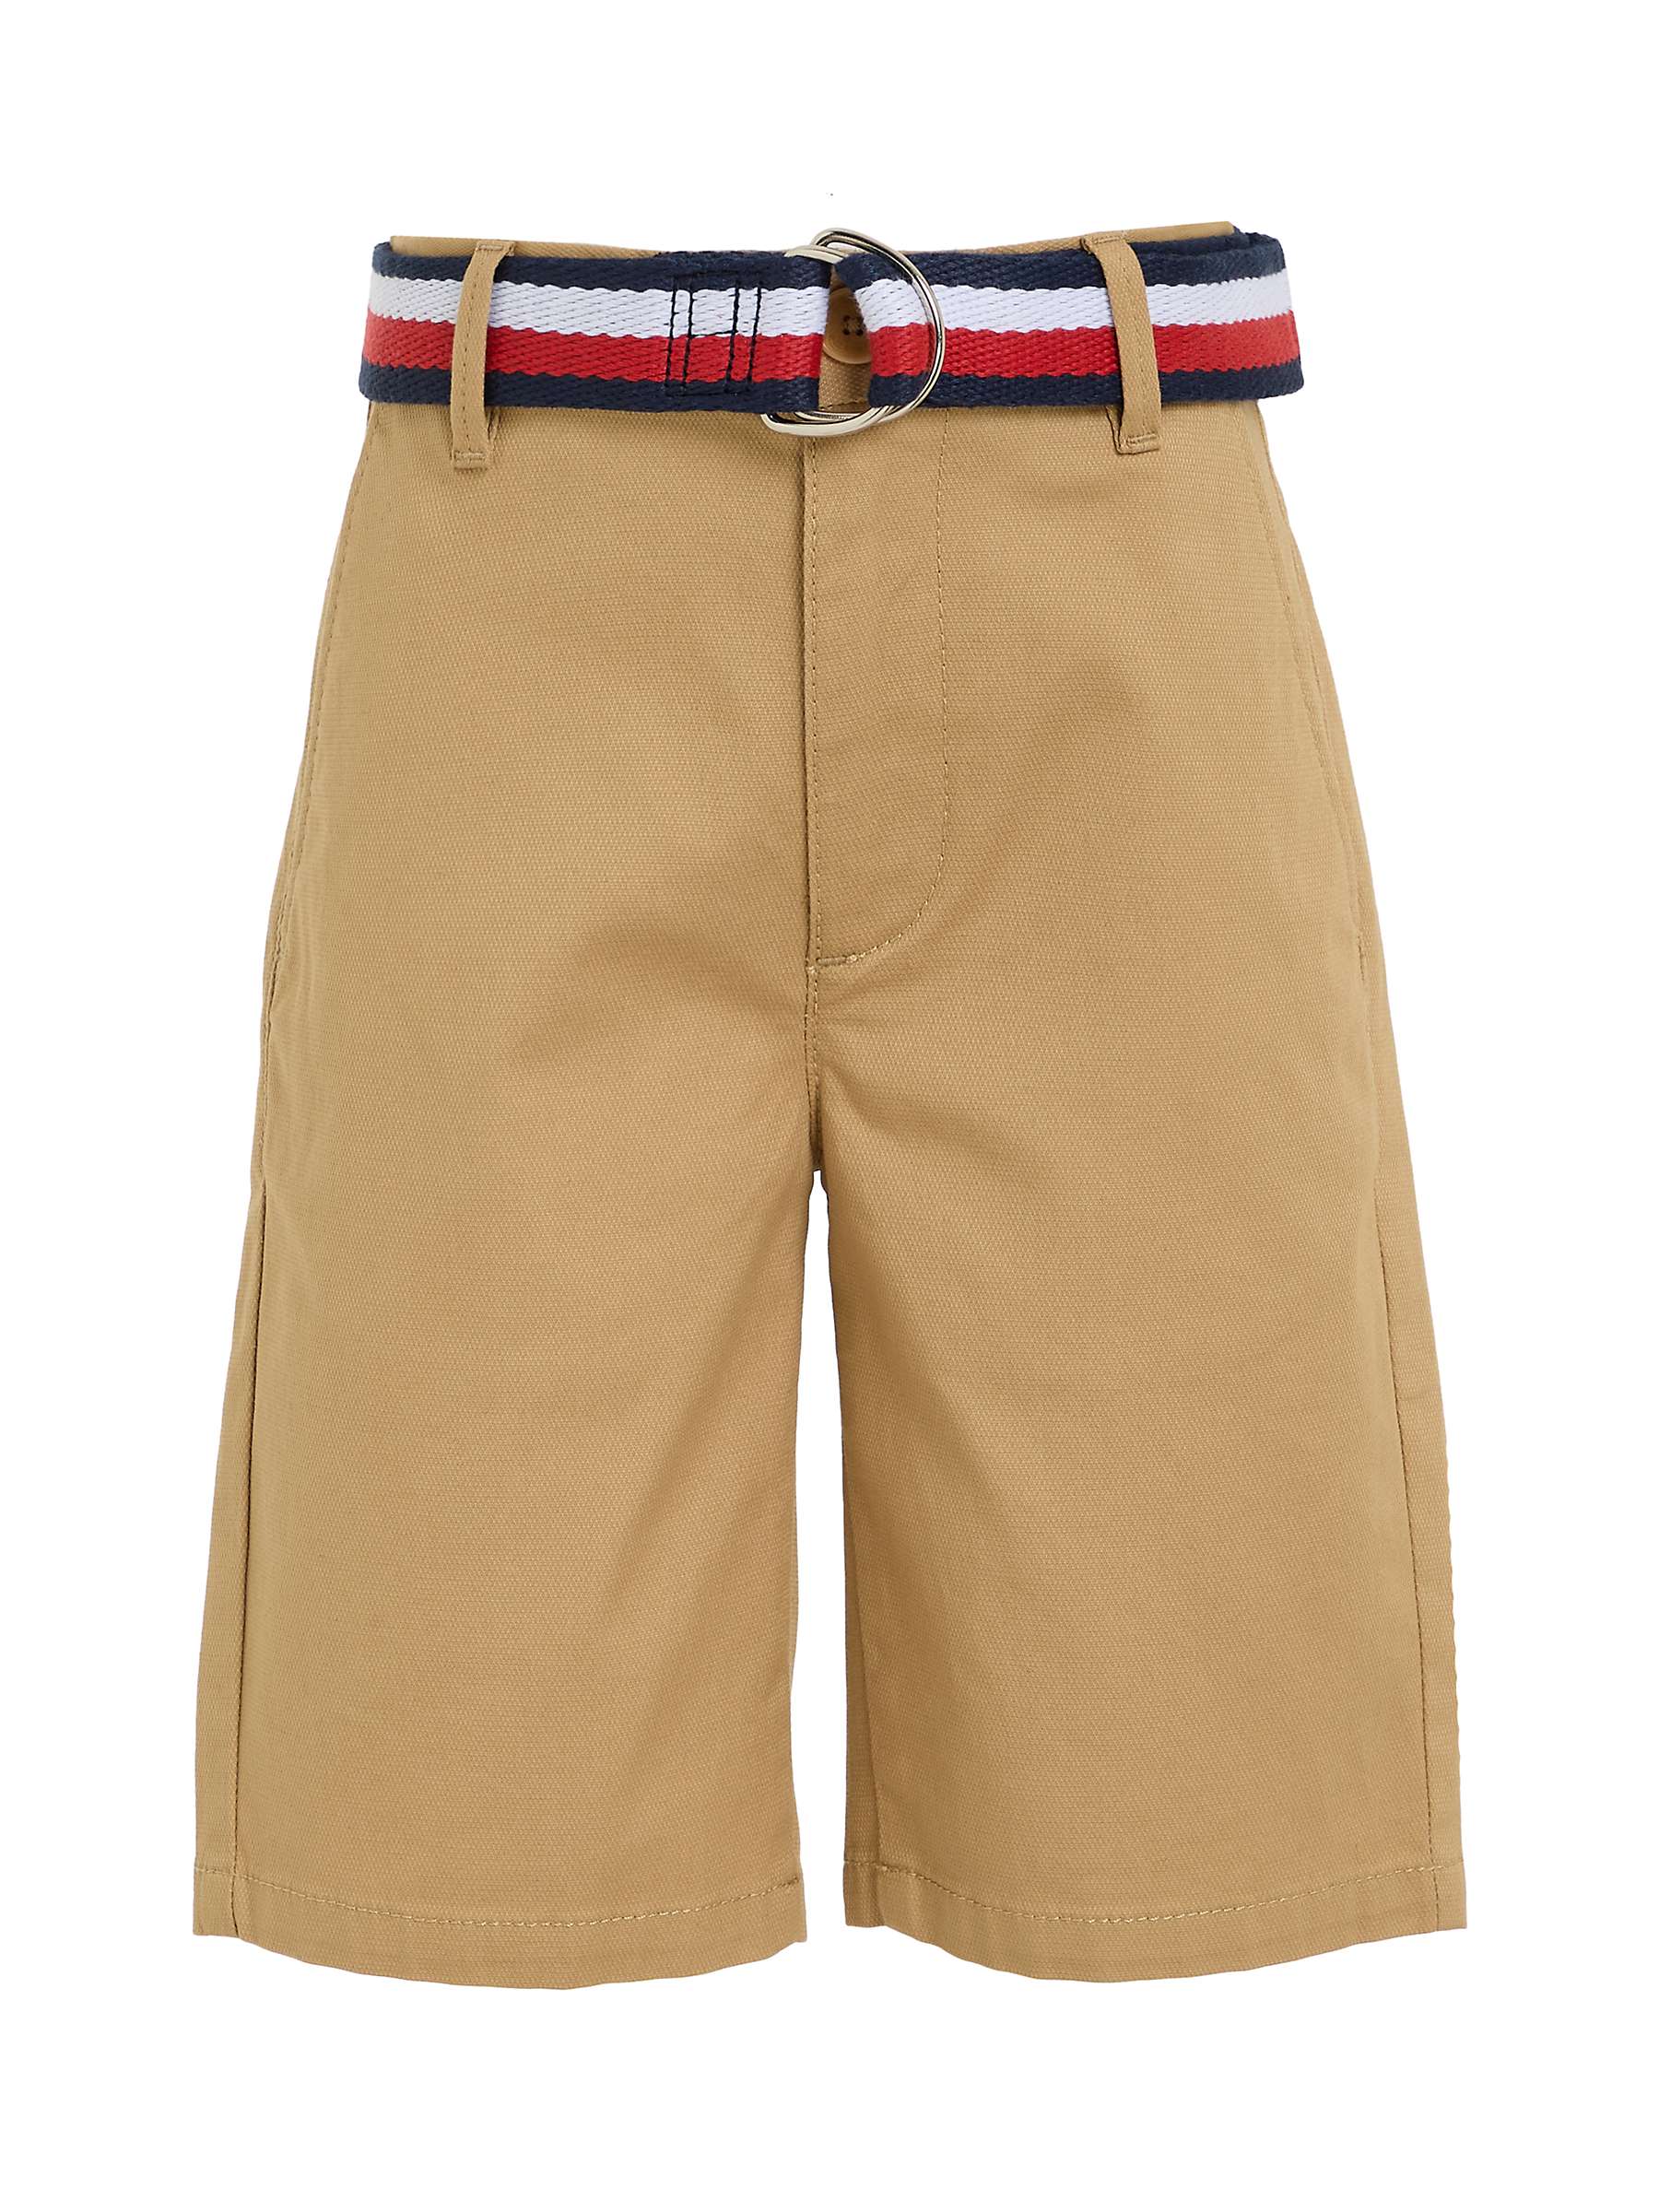 Buy Tommy Hilfiger Kids' Woven Belted Chino Shorts, Classic Khaki Online at johnlewis.com